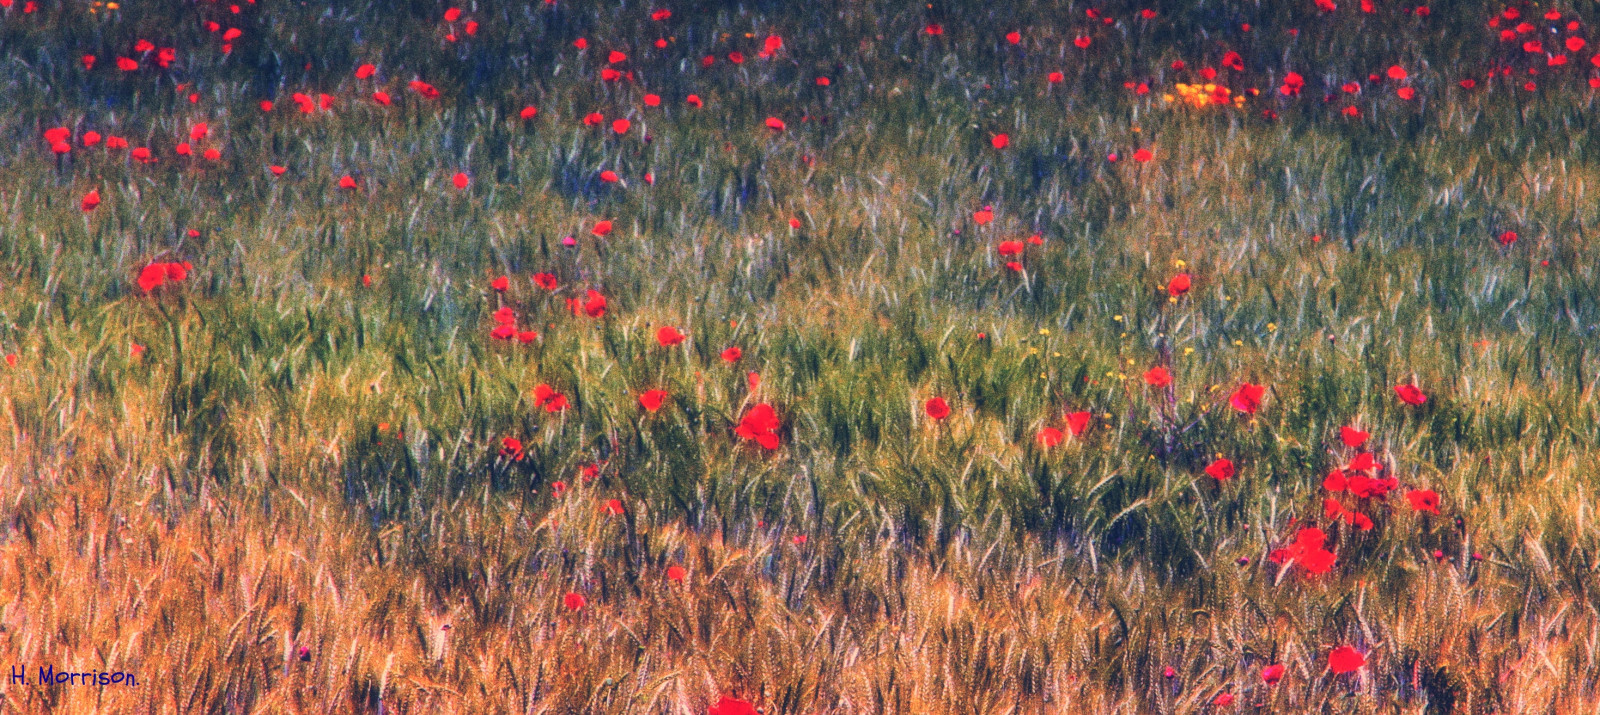 Wallpaper flowers wild painterly flower color texture nature colors field grass yahoo google cornfield colorful flickr g meadow email poppy grasses wildflowers multicolored grassland share mothernature facebook tweet poppys